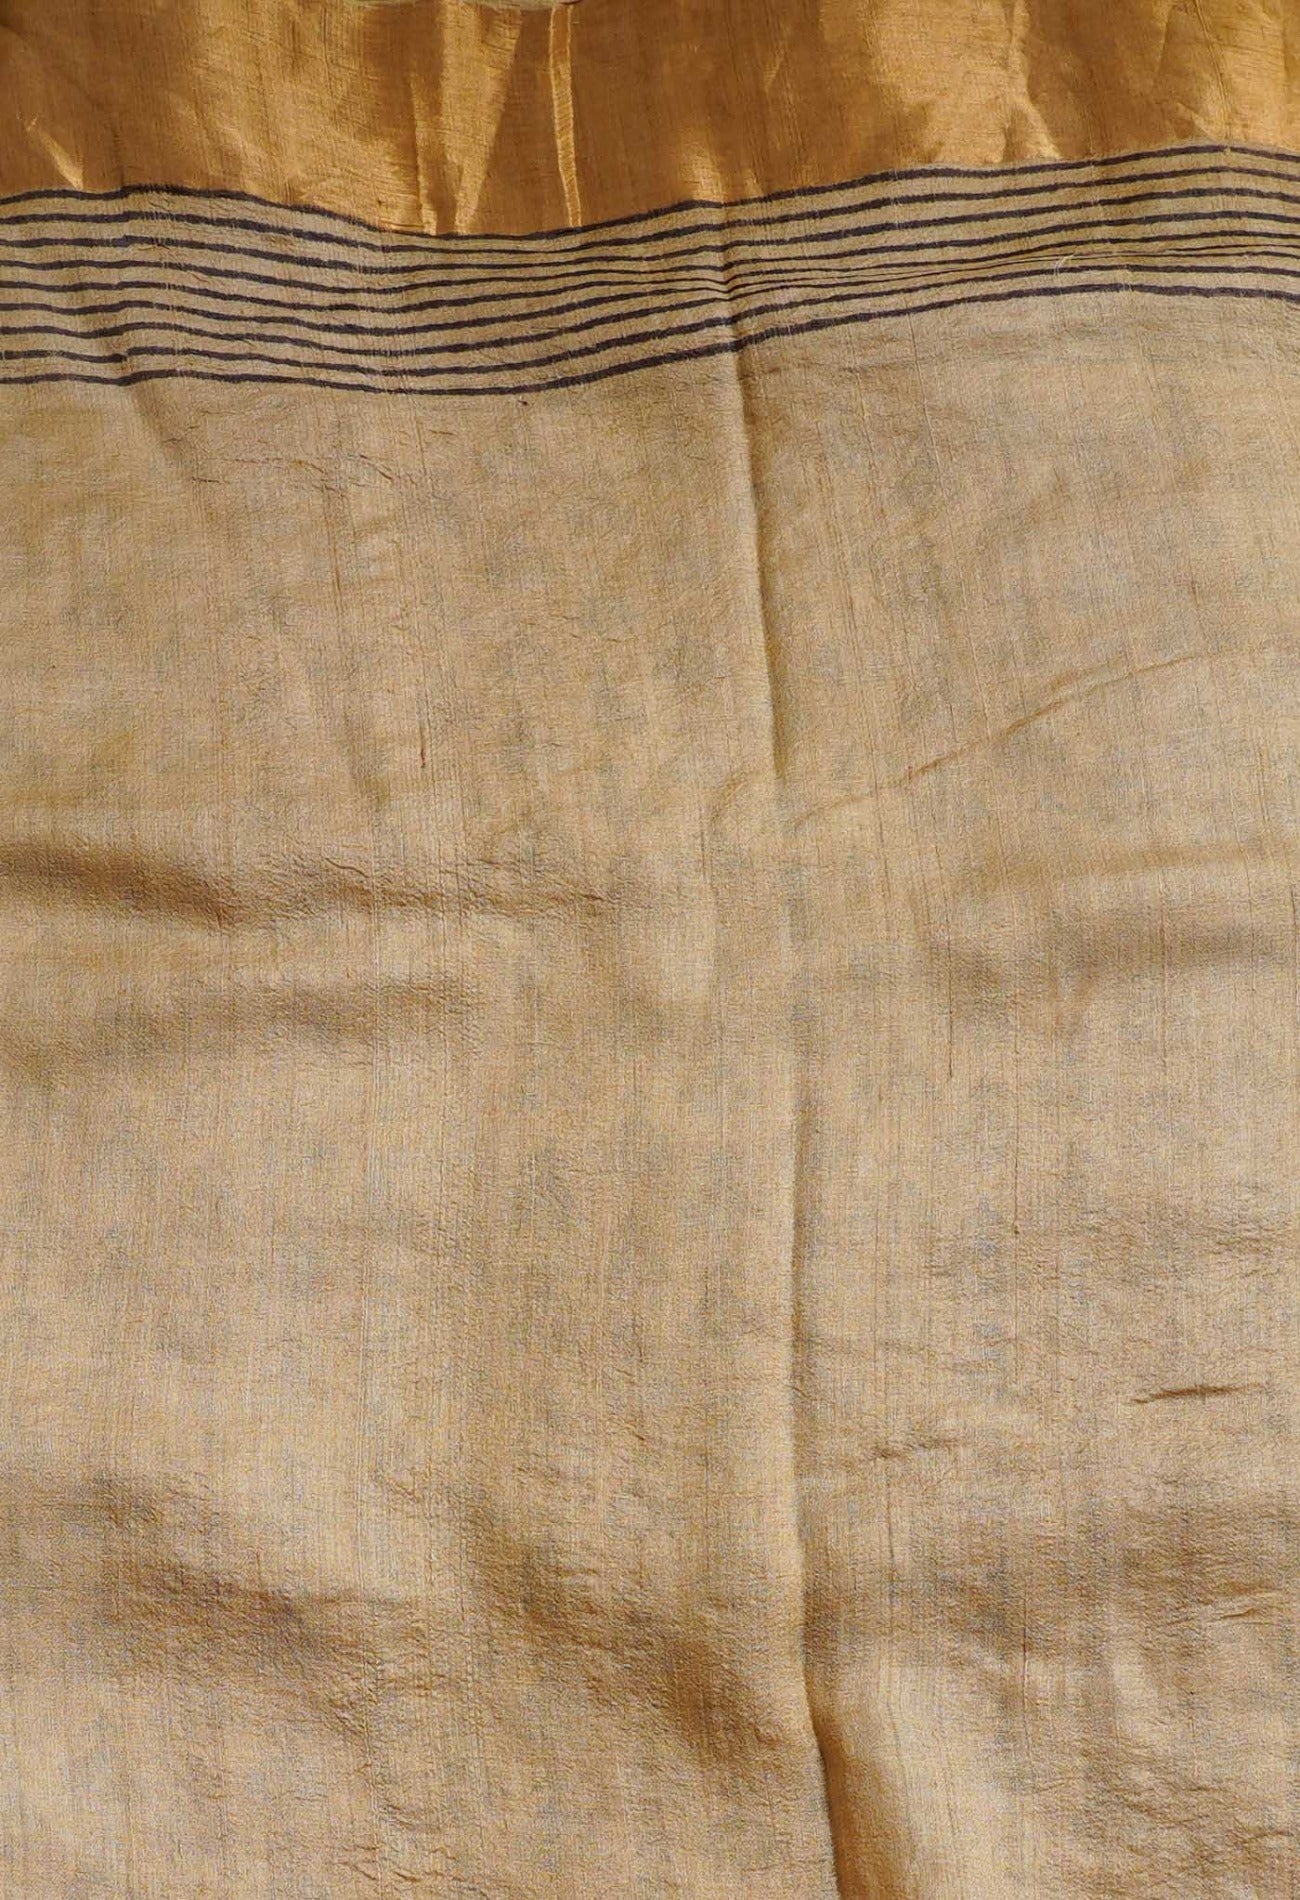 Online Shopping for Brown Pure Handloom Block Printed Bengal Tussar Silk Saree with Hand Block Prints from West Bengal at Unnatisilks.comIndia
